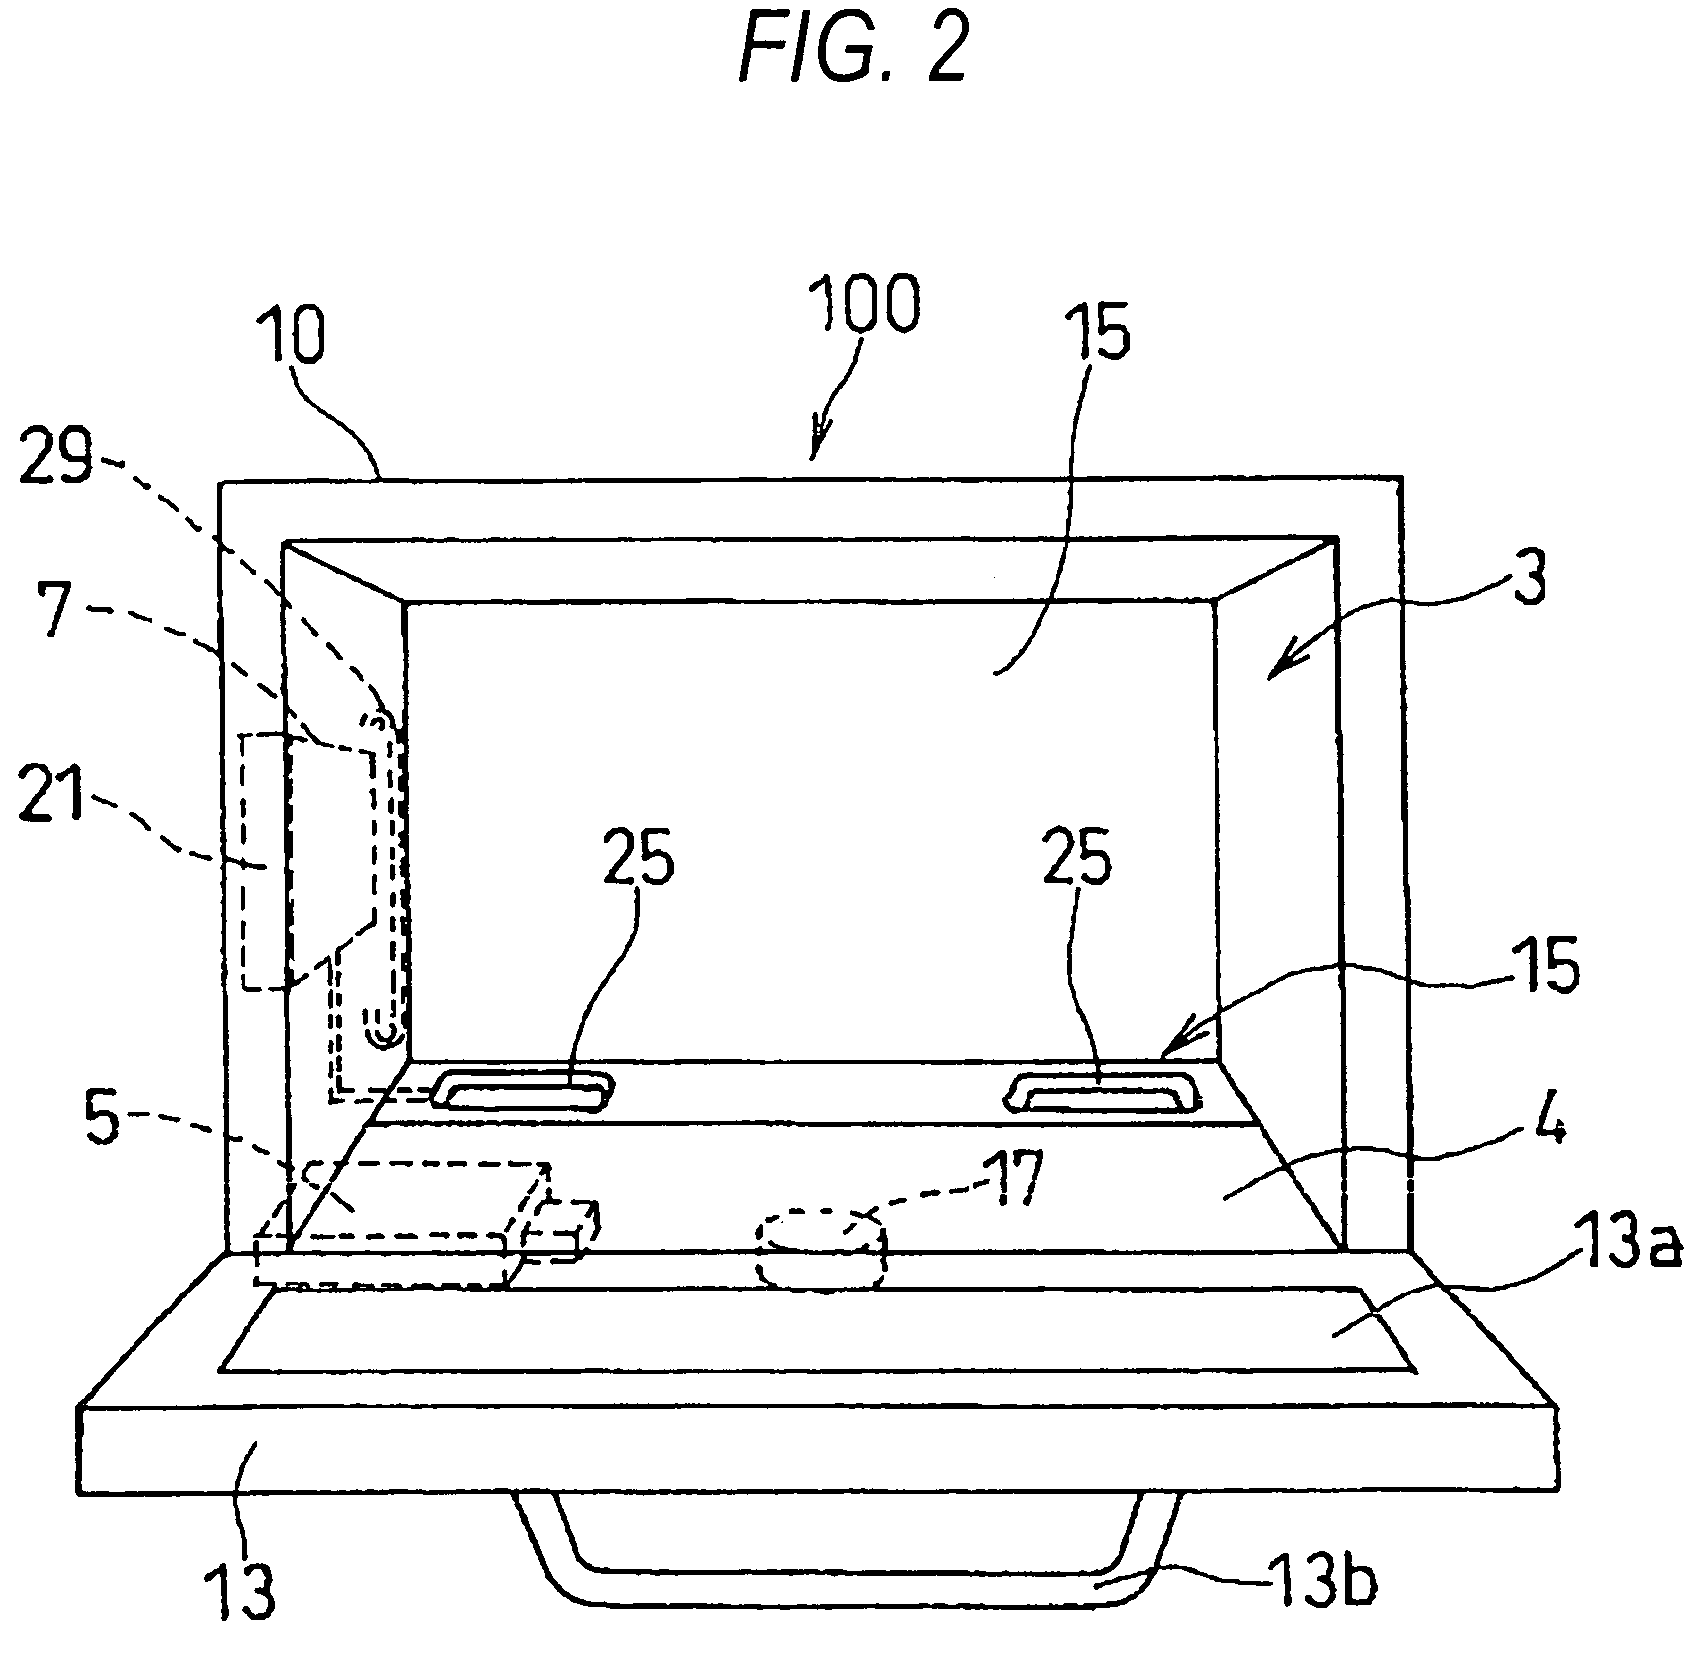 High frequency heating device with steam generating function